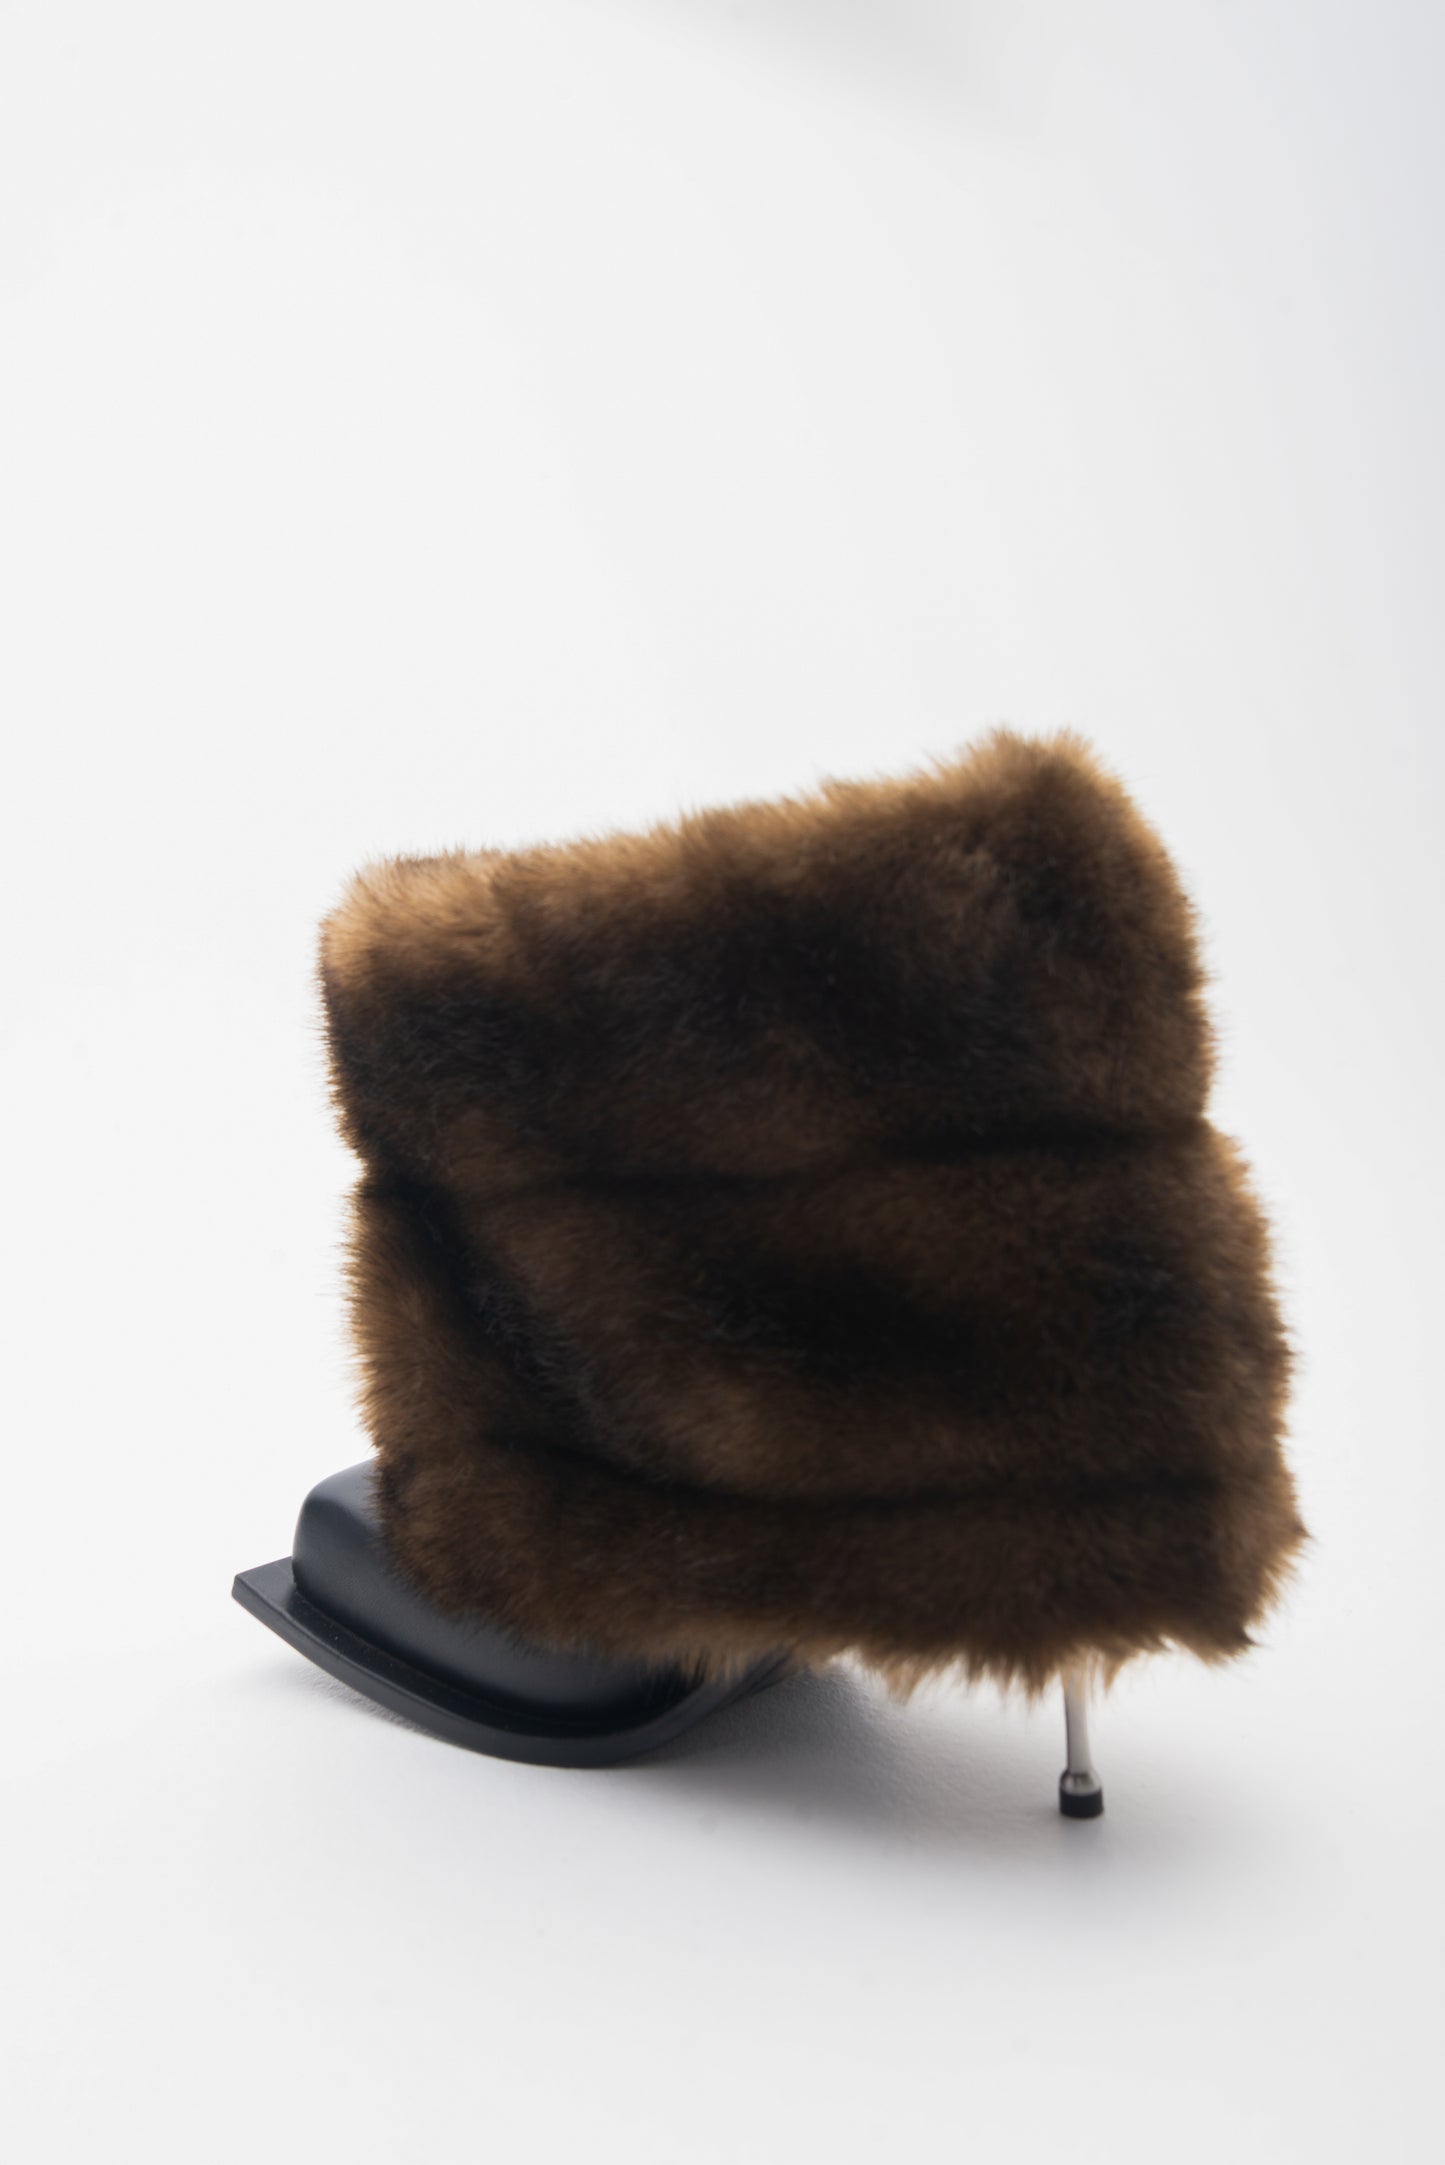 IMAN STILETTO HEEL BOOTS WITH BROWN FAUX FUR